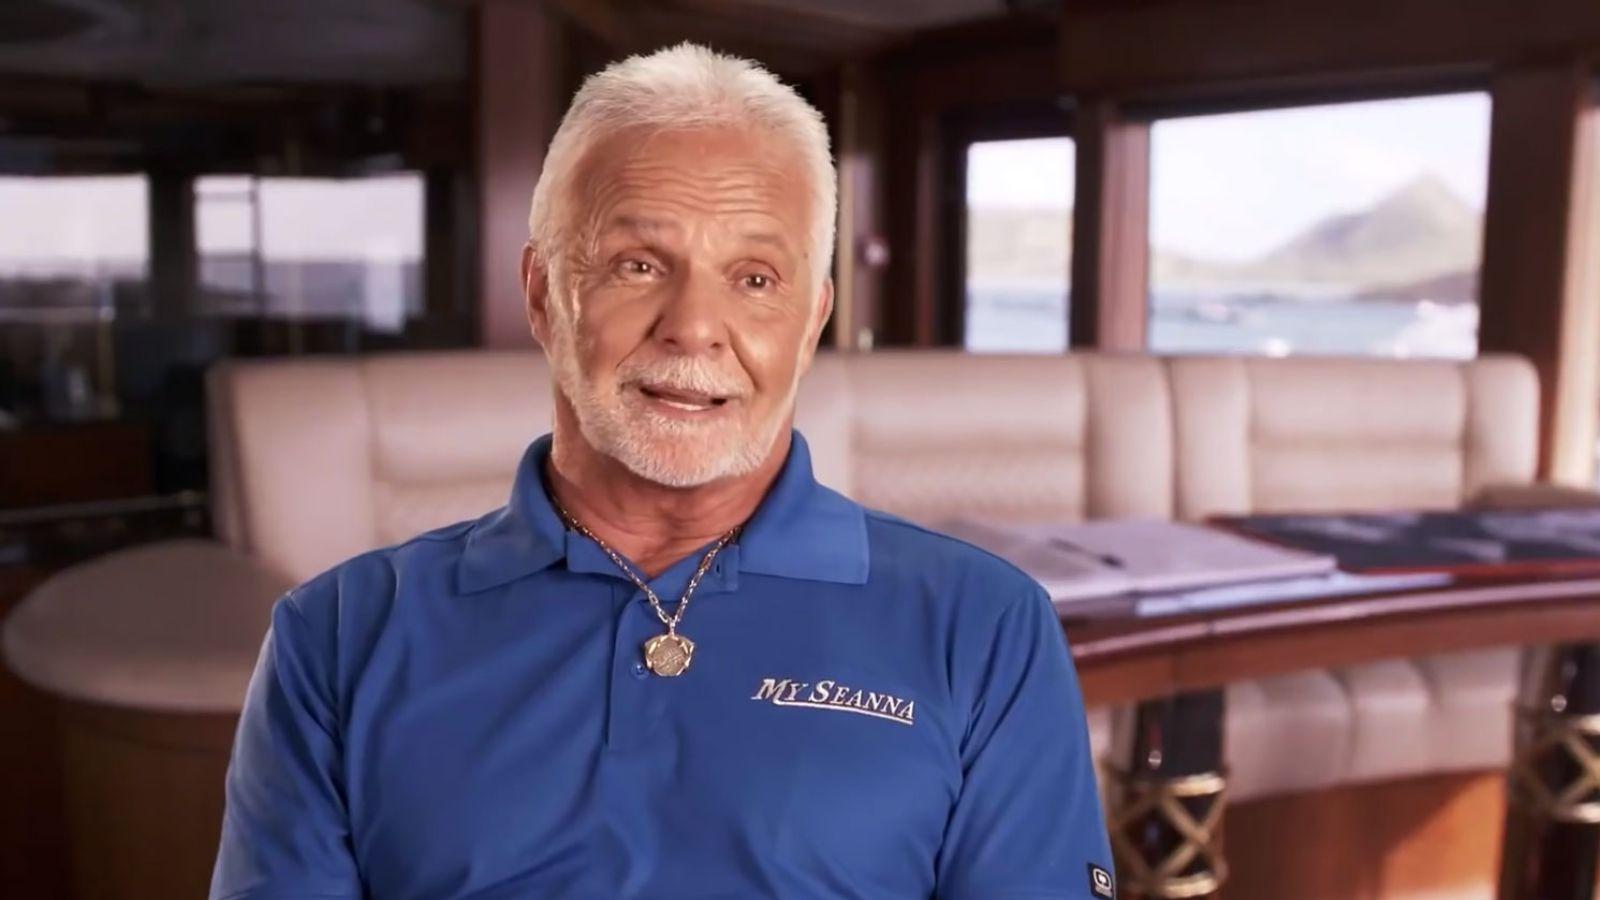 Captain Lee Rosbach from Below Deck